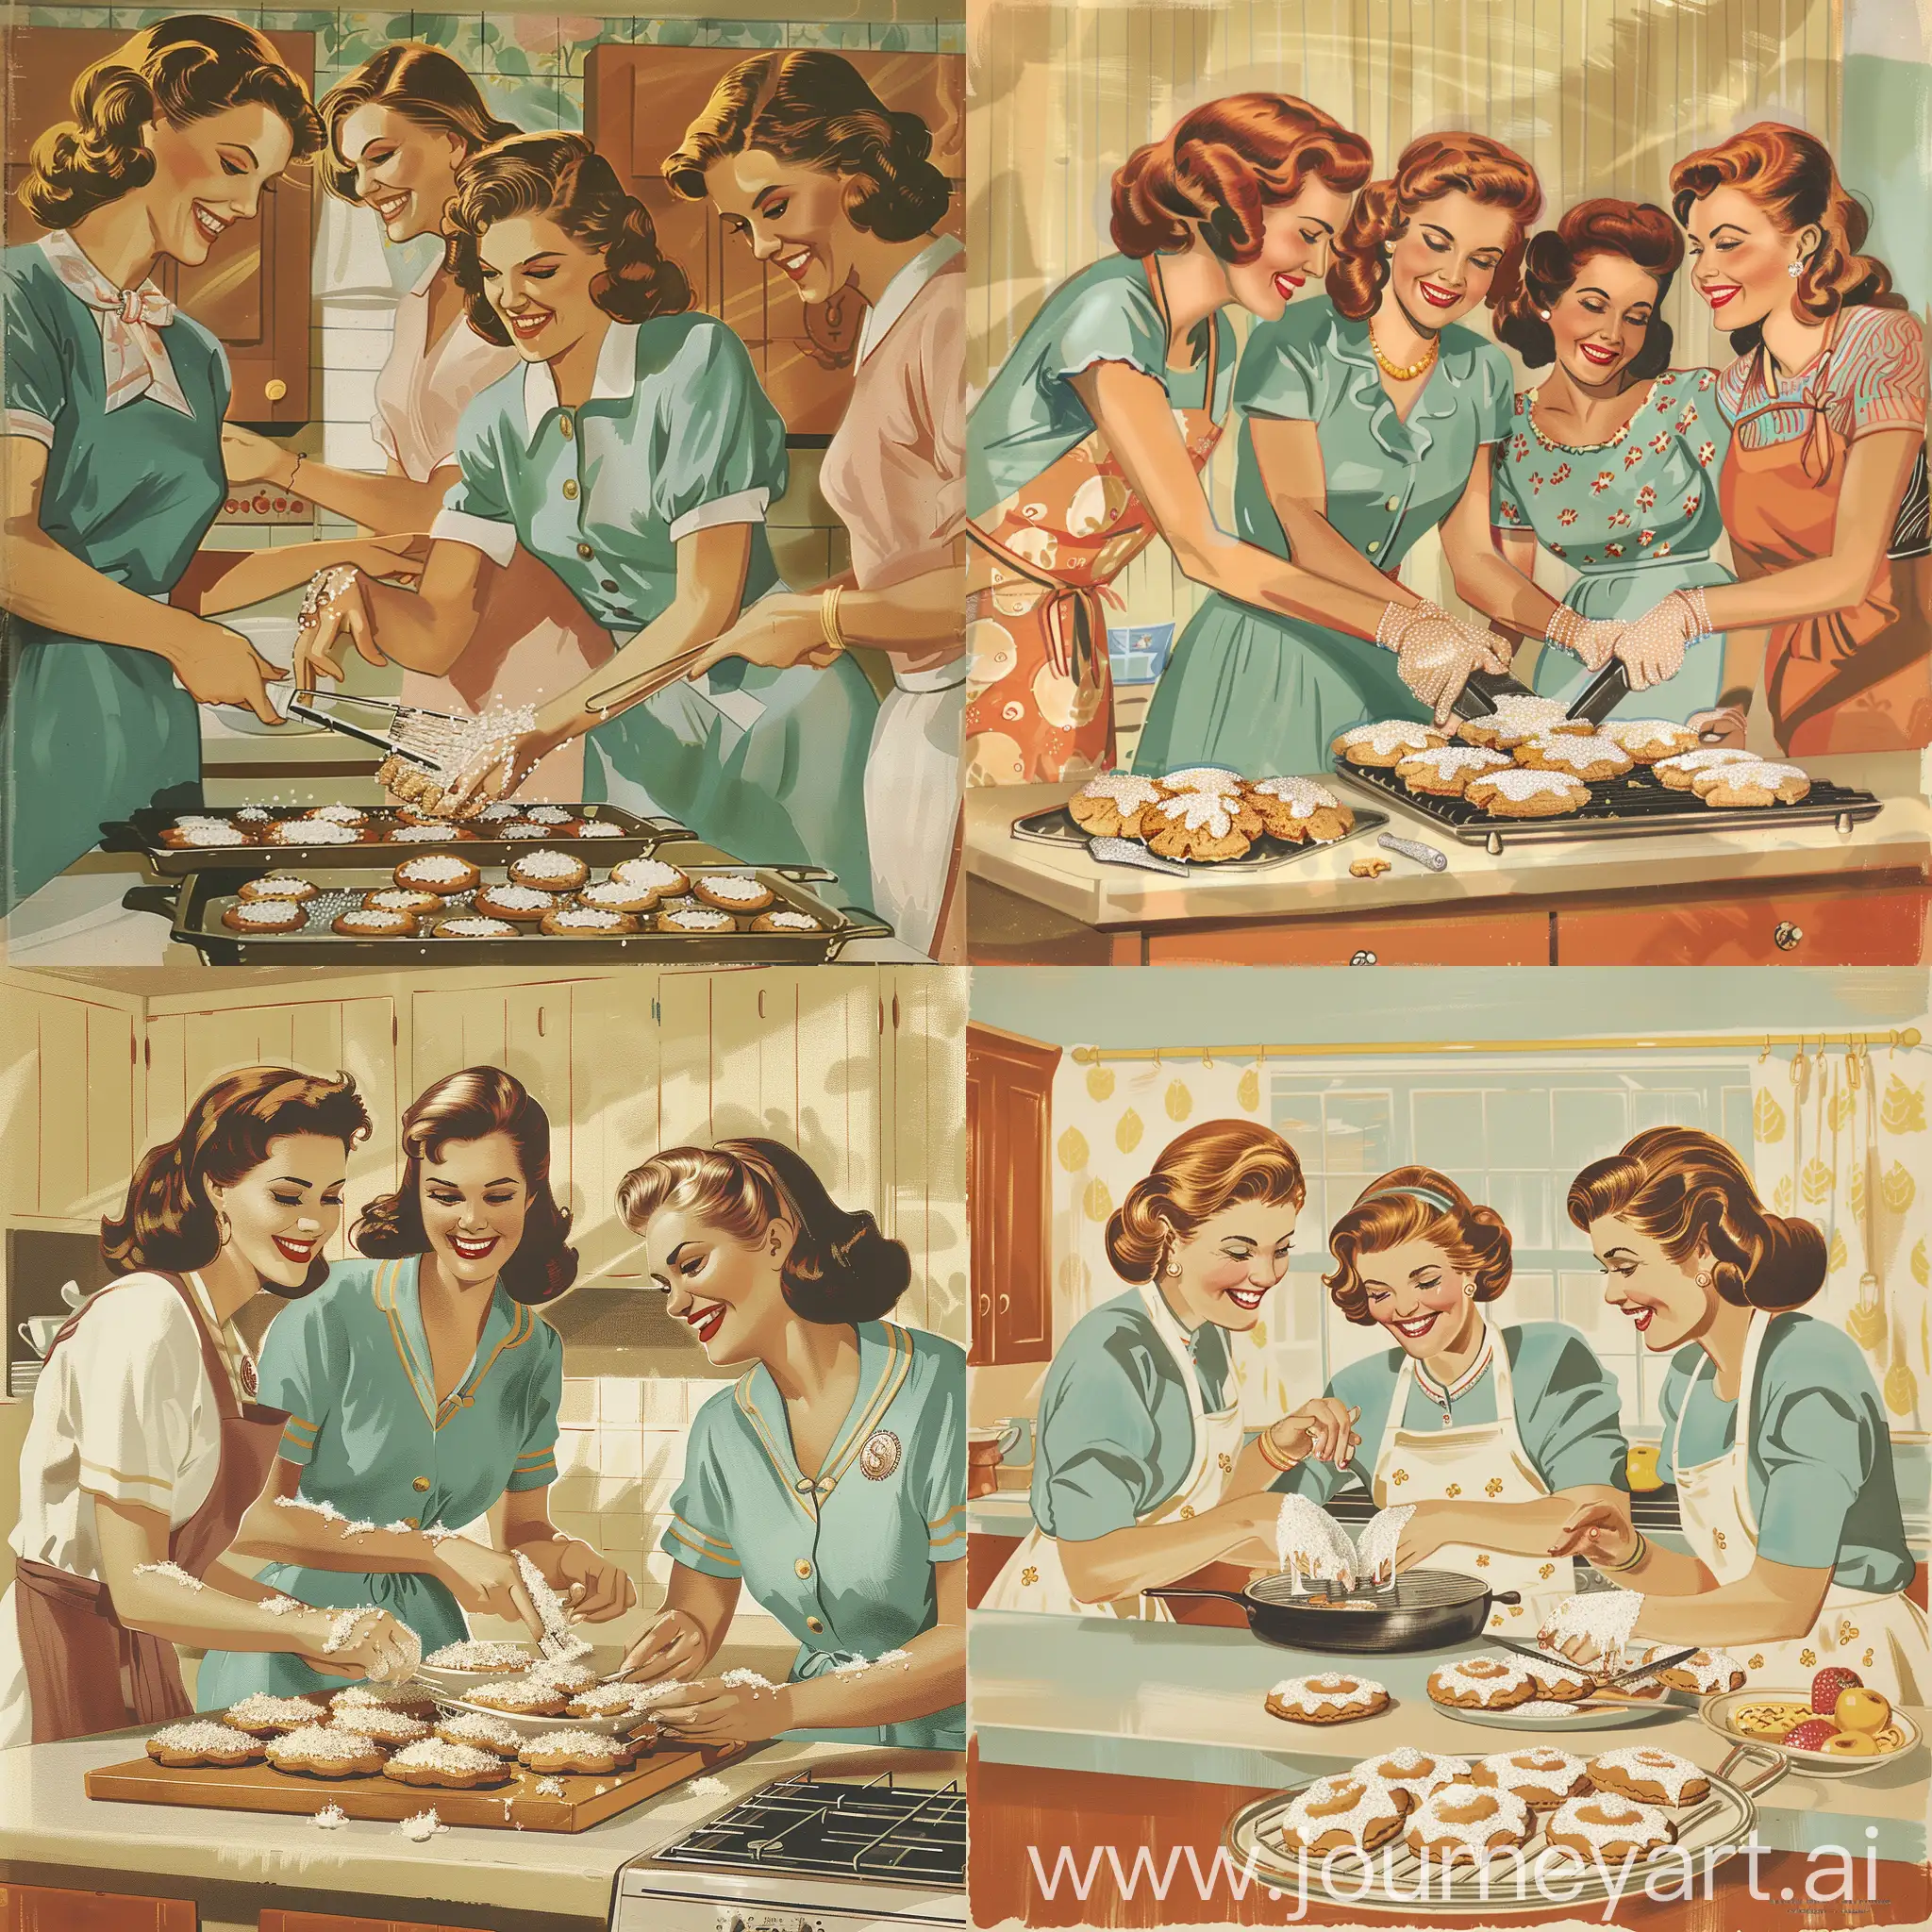 an illustration of three women baking cookies covered with sugar icing while smiling in a cozy kitchen in the 1950s in the midcentury style of Josh Agle